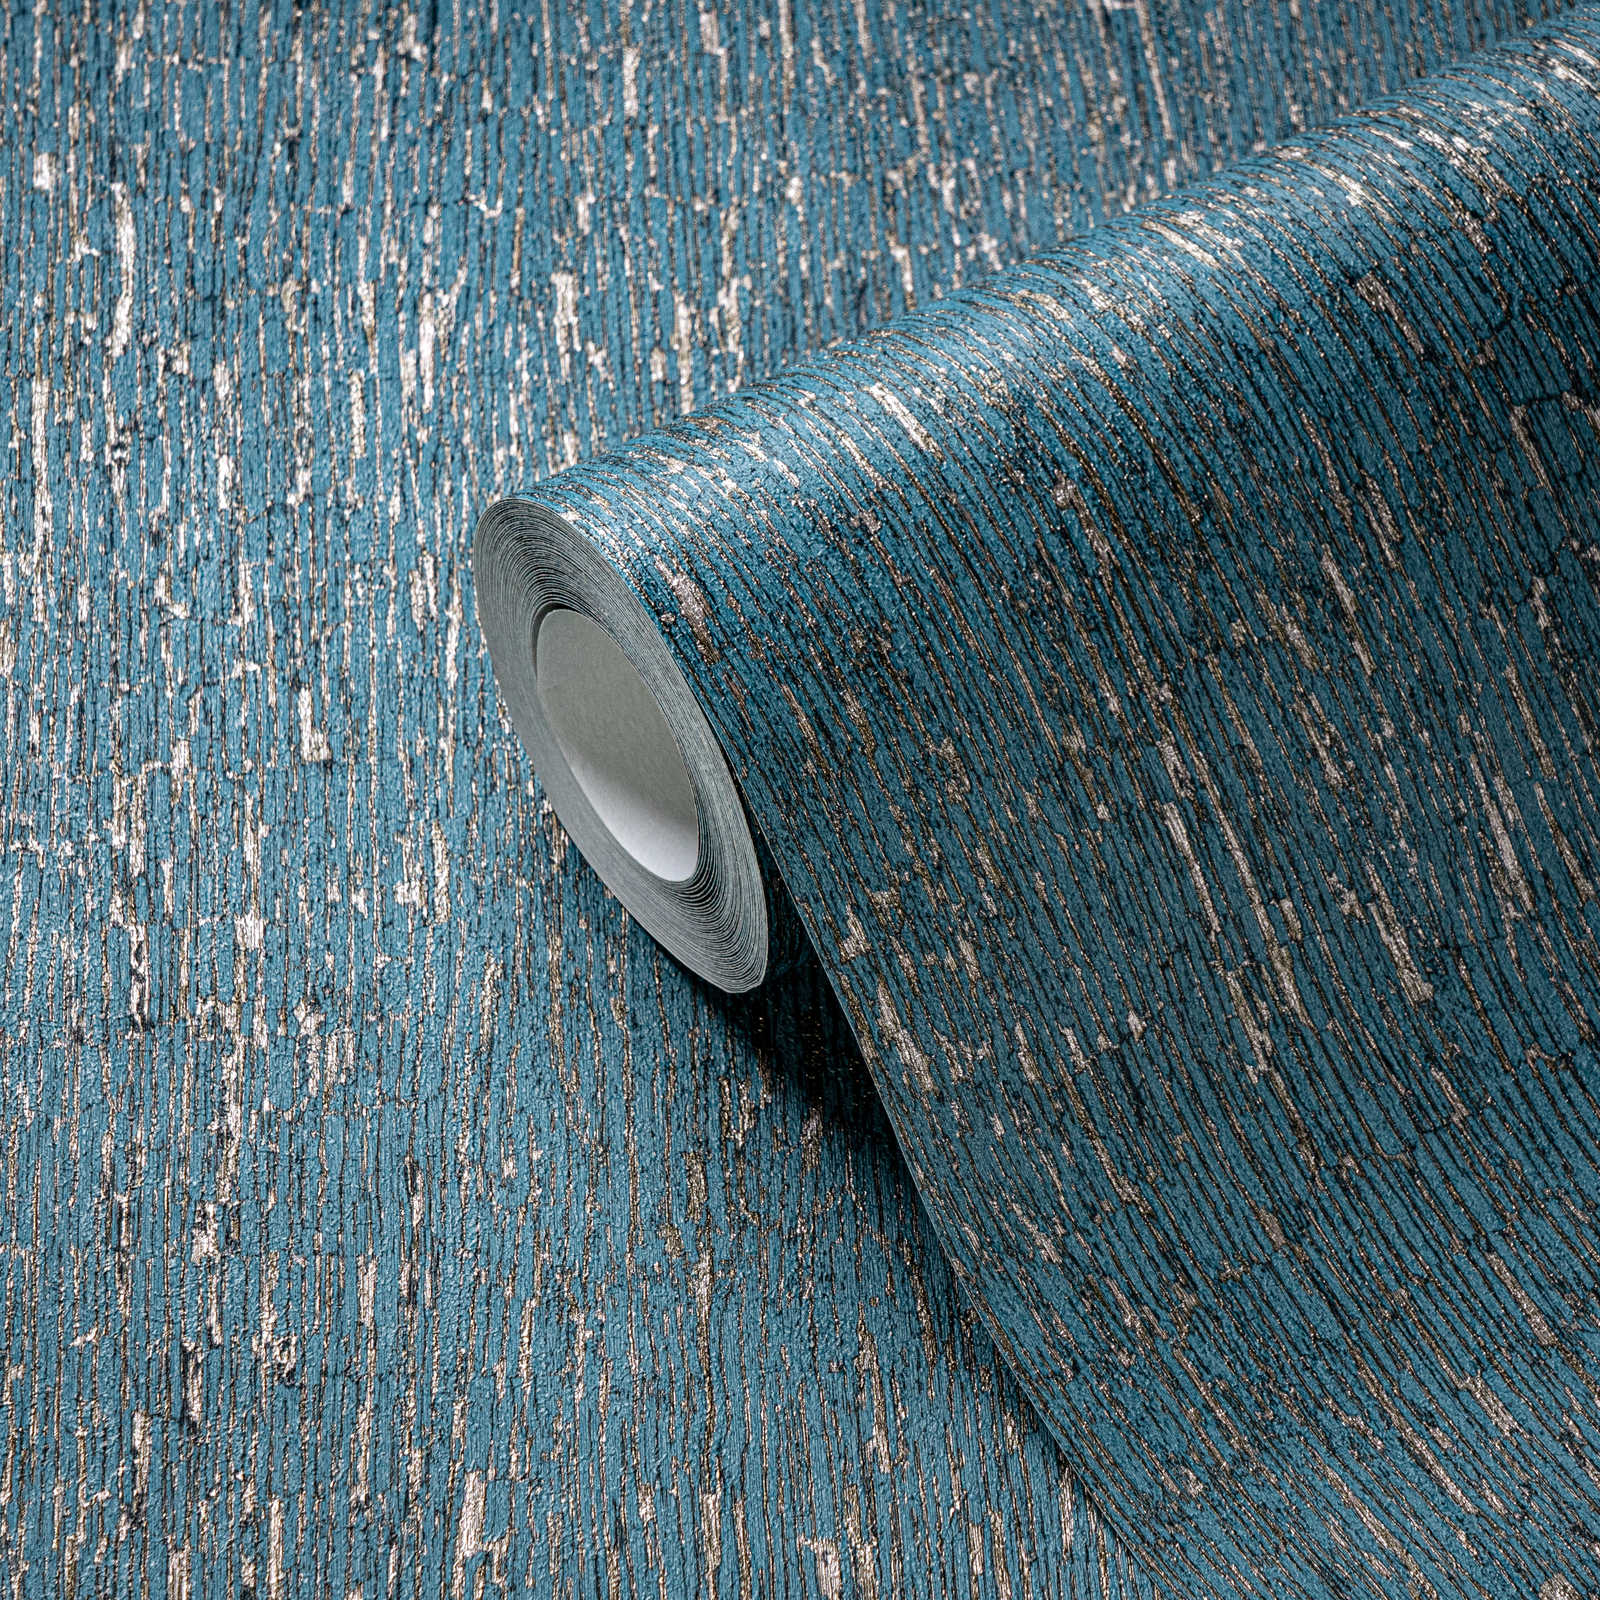             Non-woven wallpaper in plaster look with gold accents - blue, petrol, silver
        